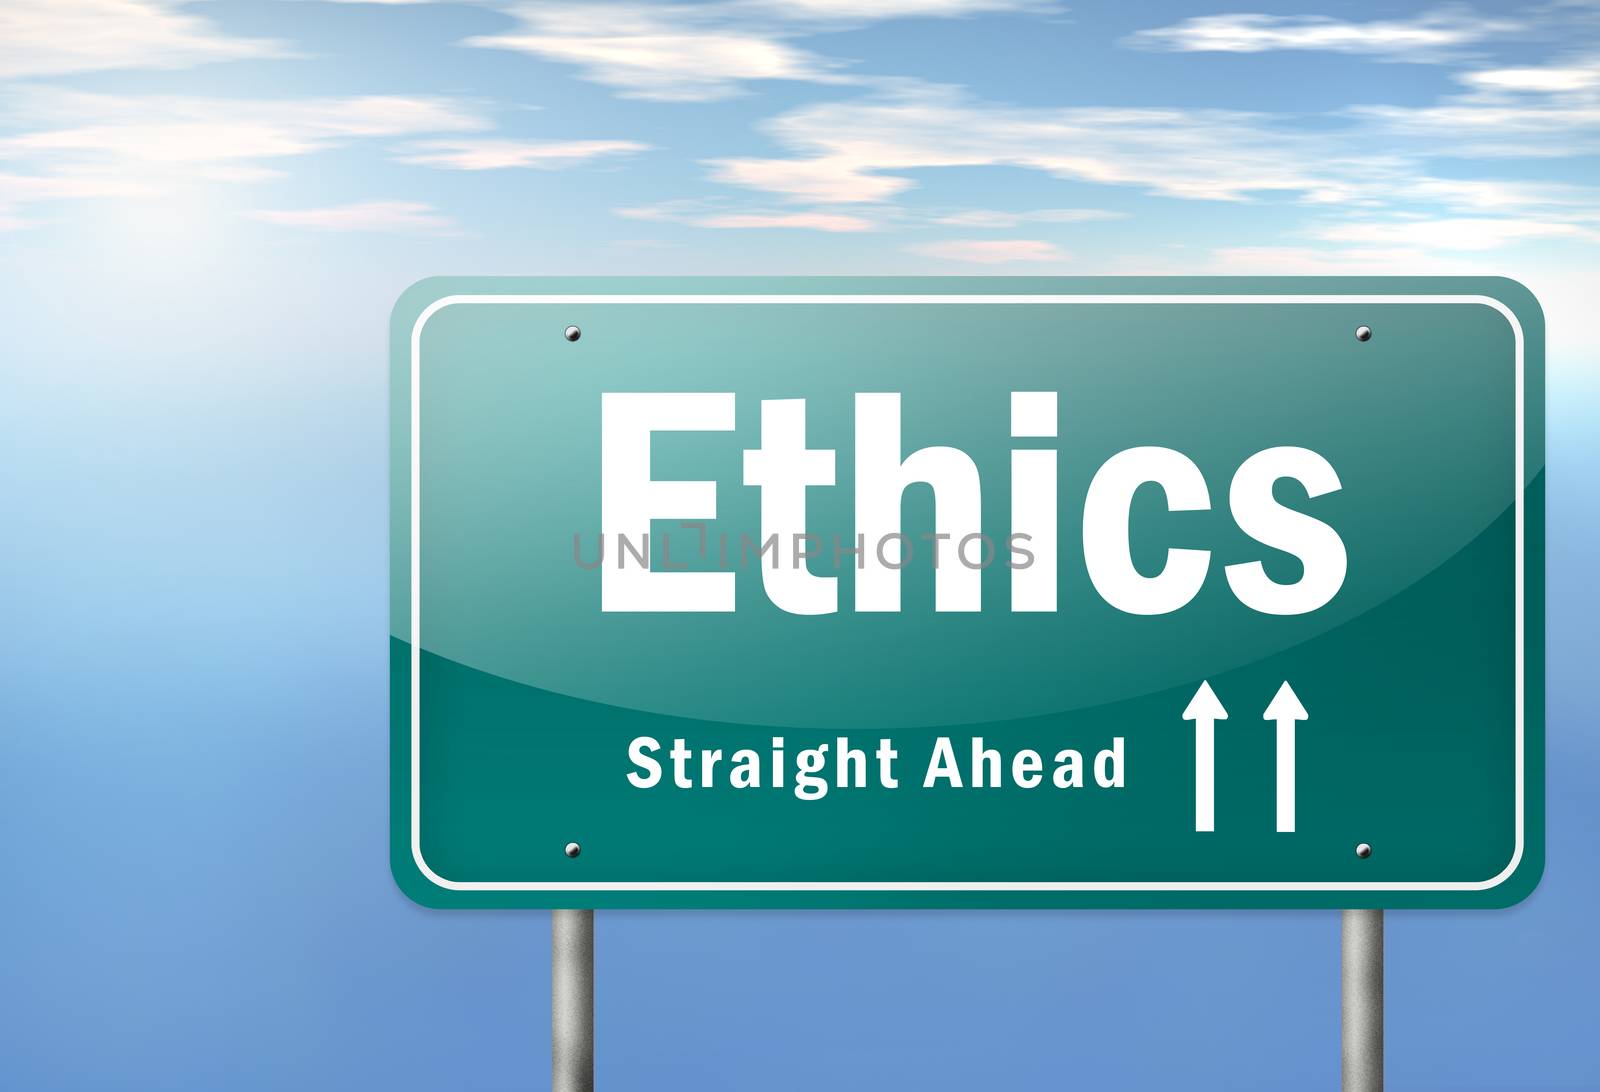 Highway Signpost with Ethics wording